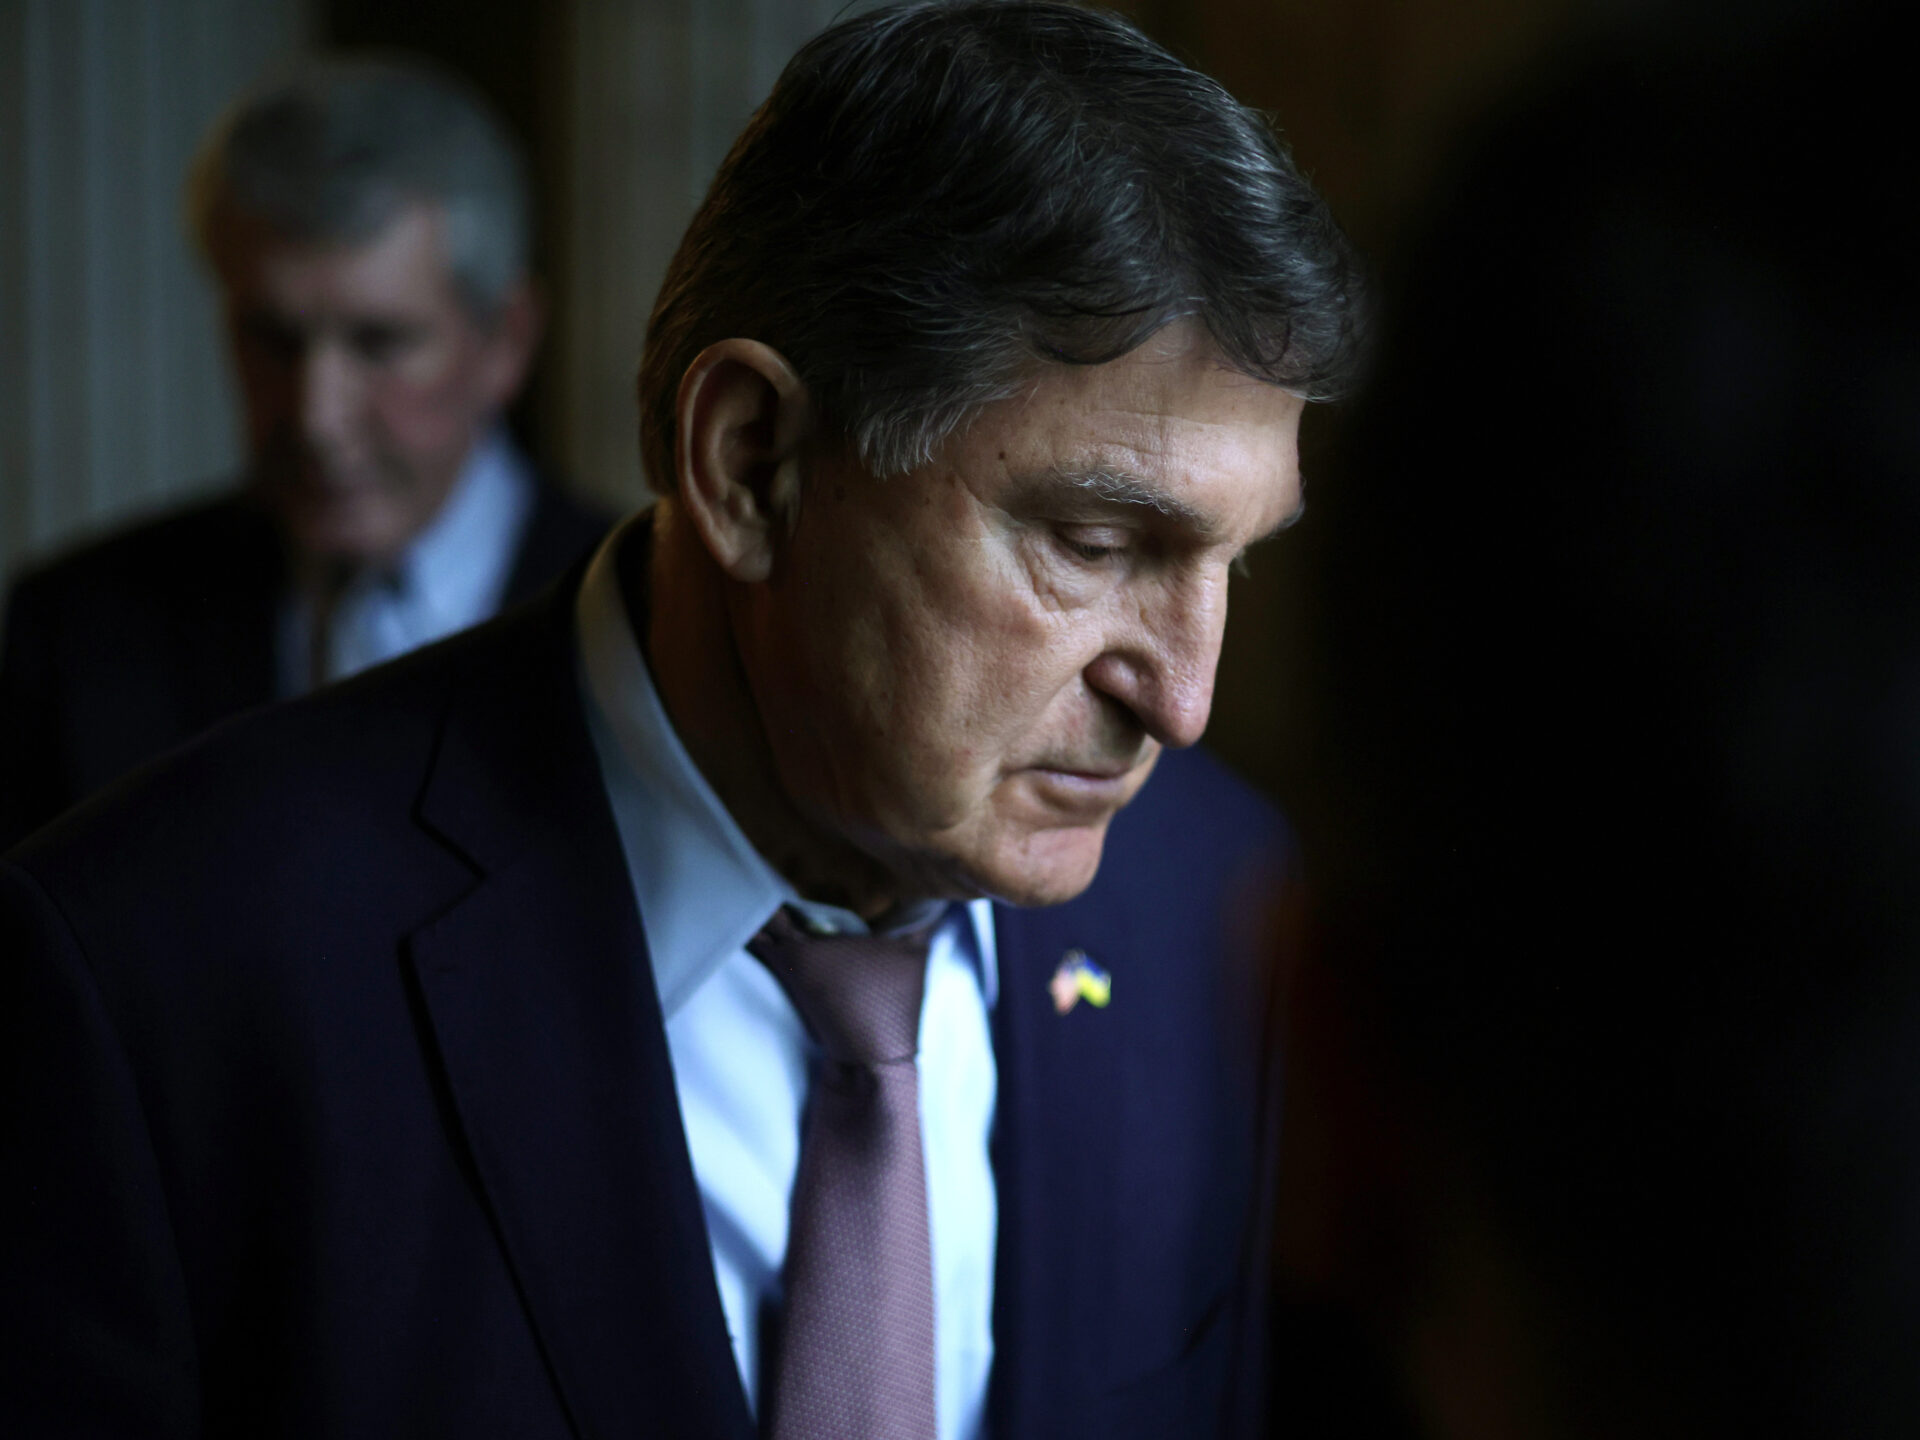 Sen. Joe Manchin On Why He Can’t Support Trump, But Isn’t Sold On Biden